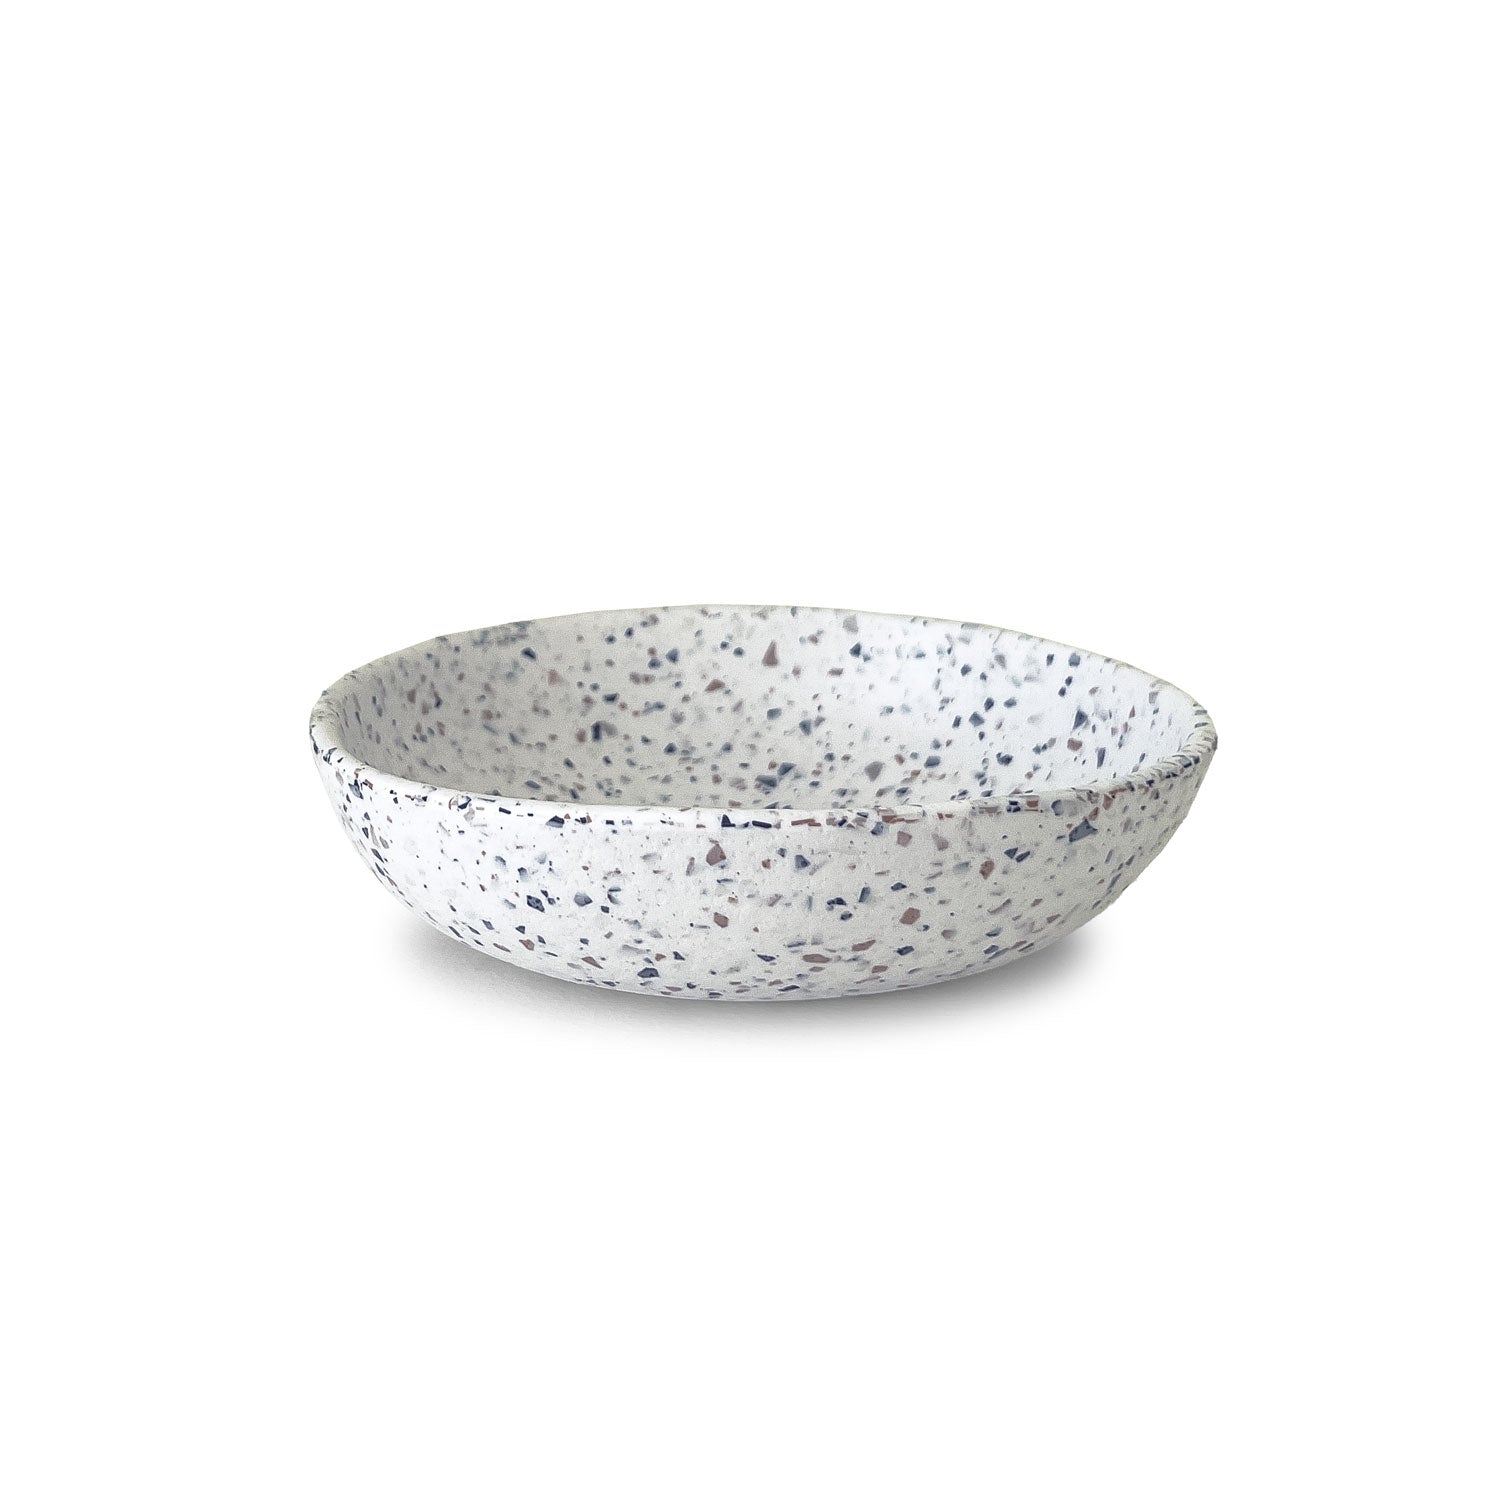 Potter Terrazzo Recycled Melamine Cereal Bowl